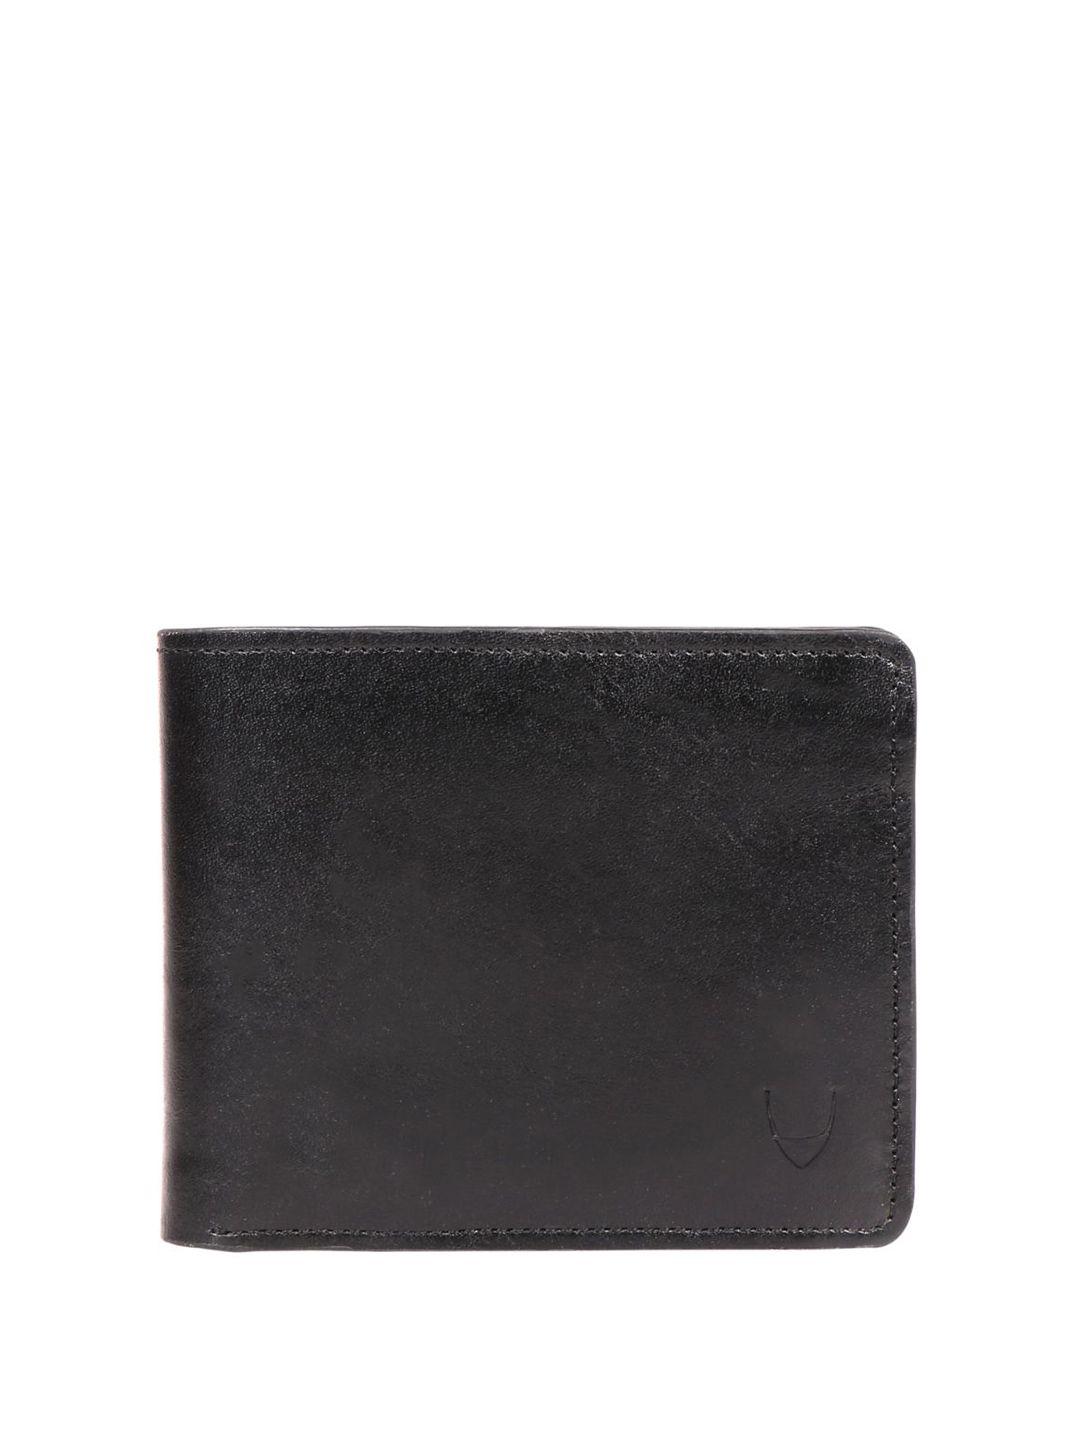 hidesign men leather two fold wallet